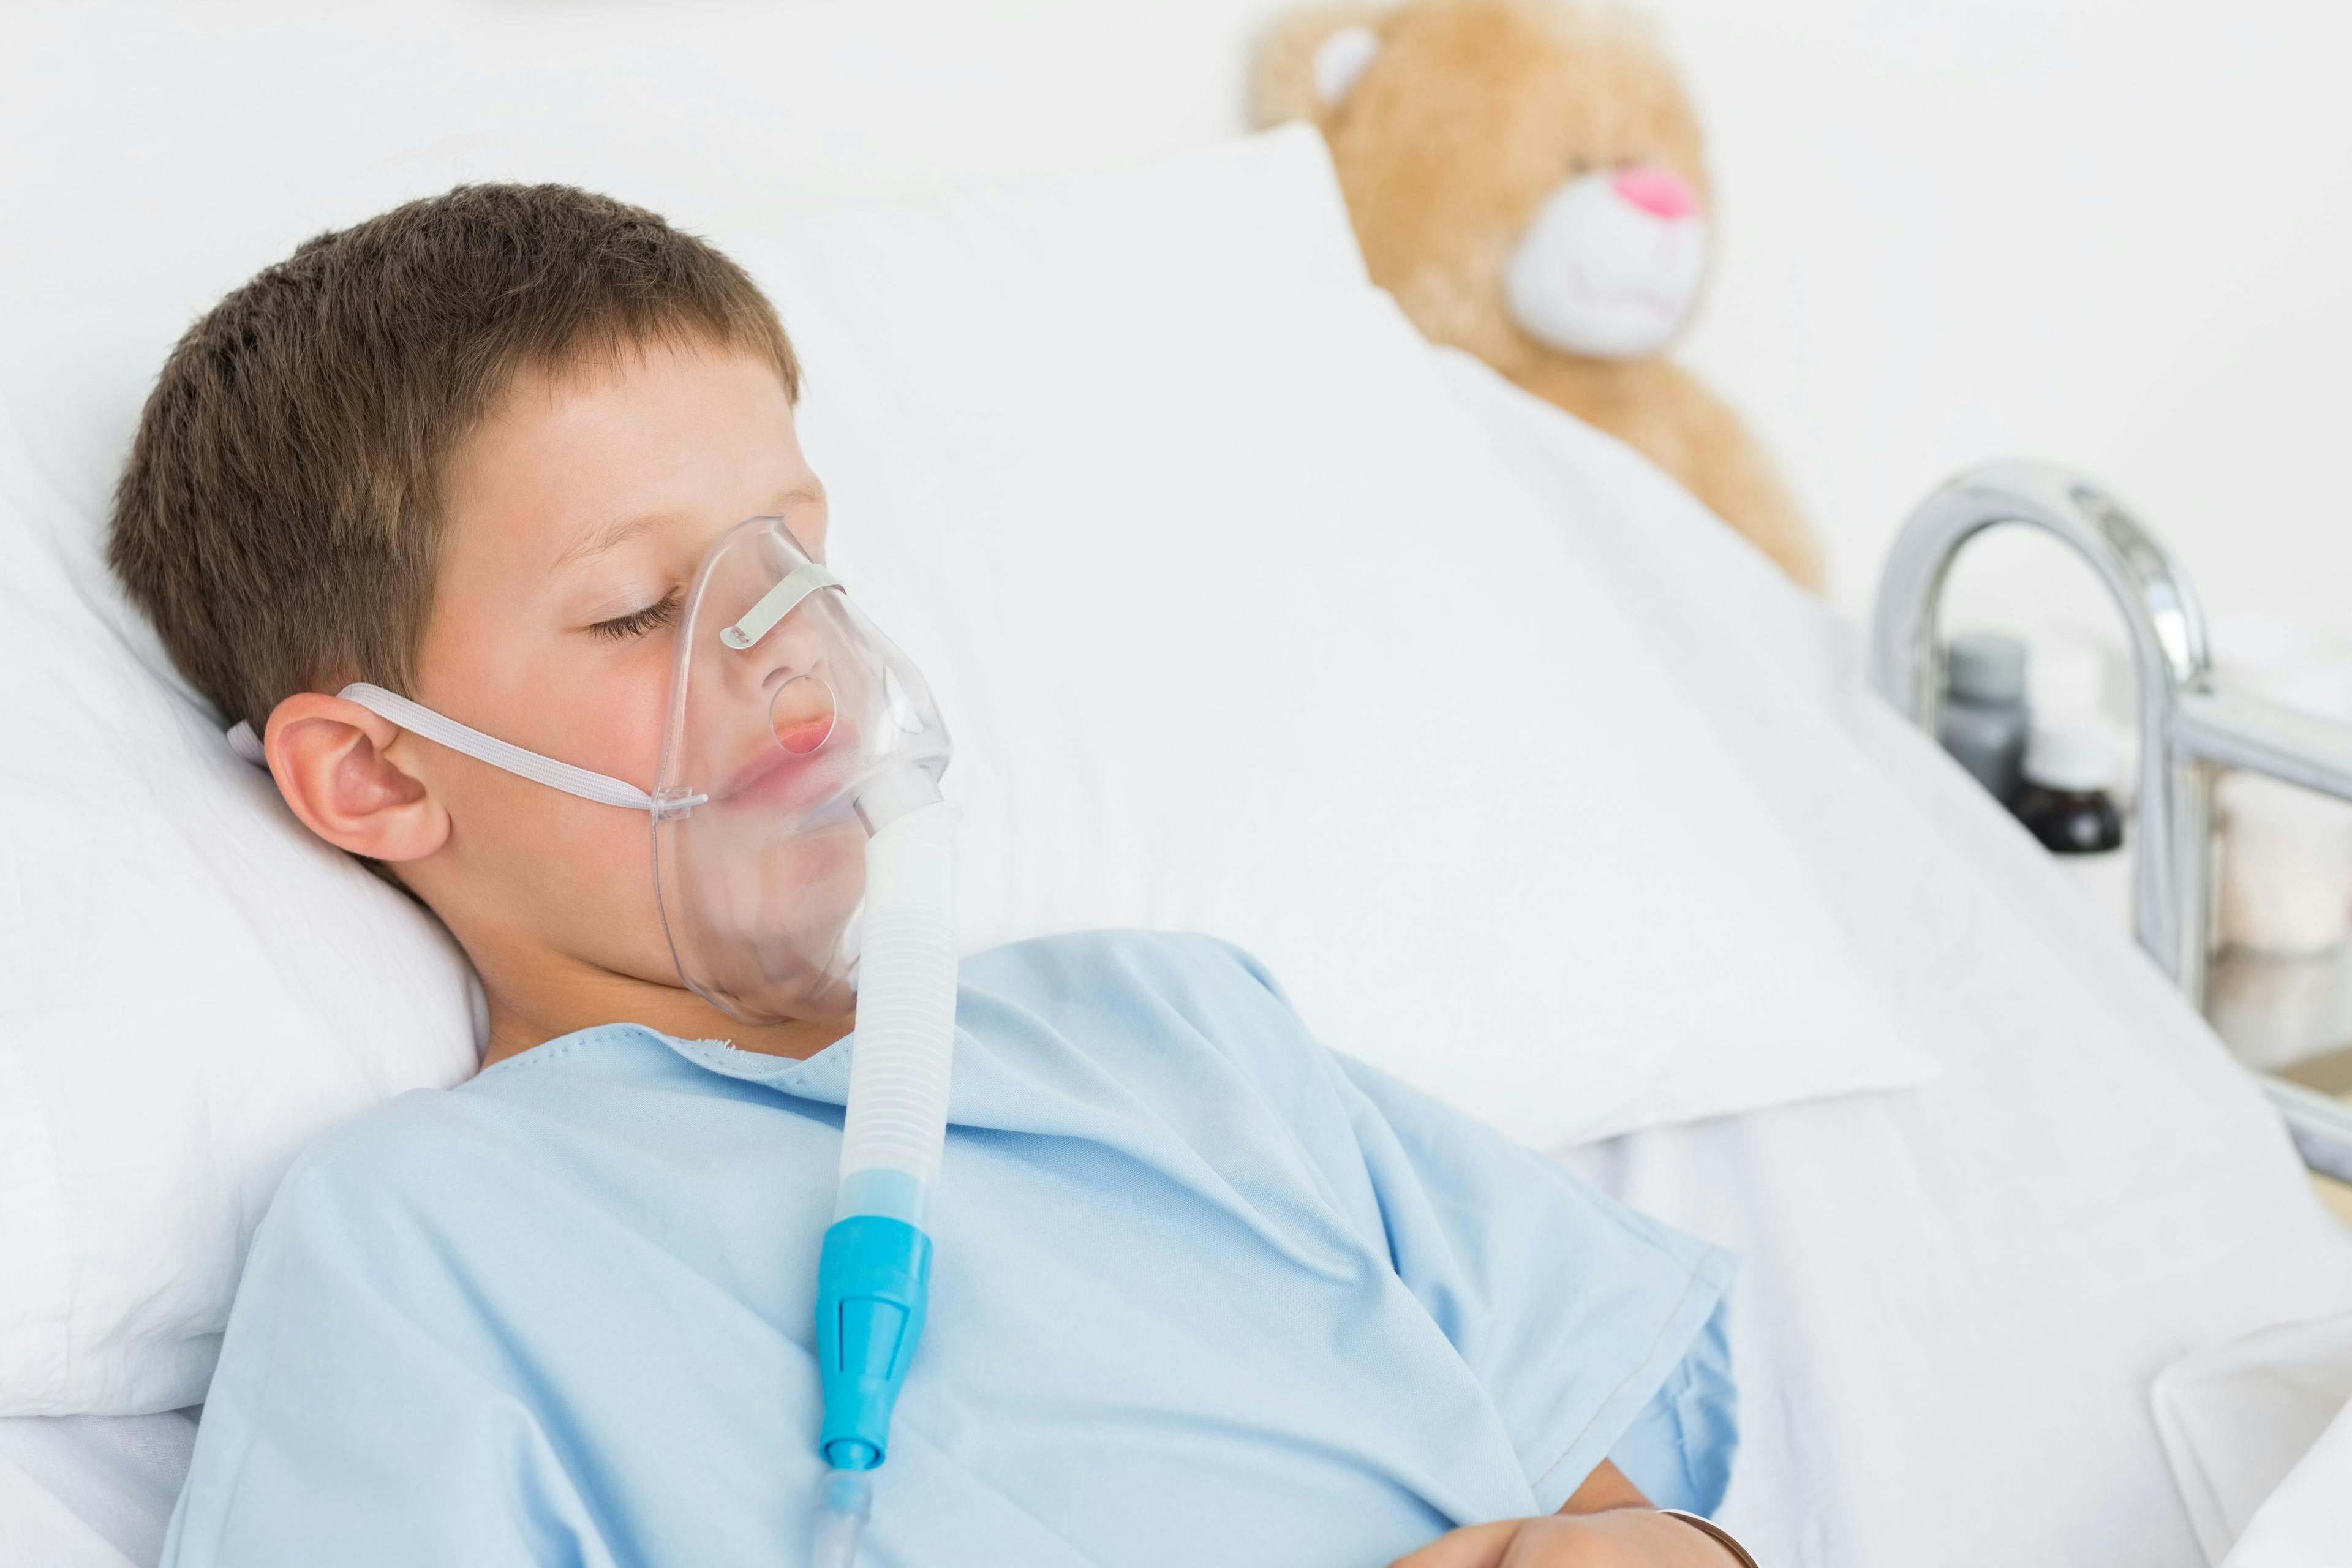 Ventilator associated infections: what is new in defining, diagnosing, and treating in pediatrics